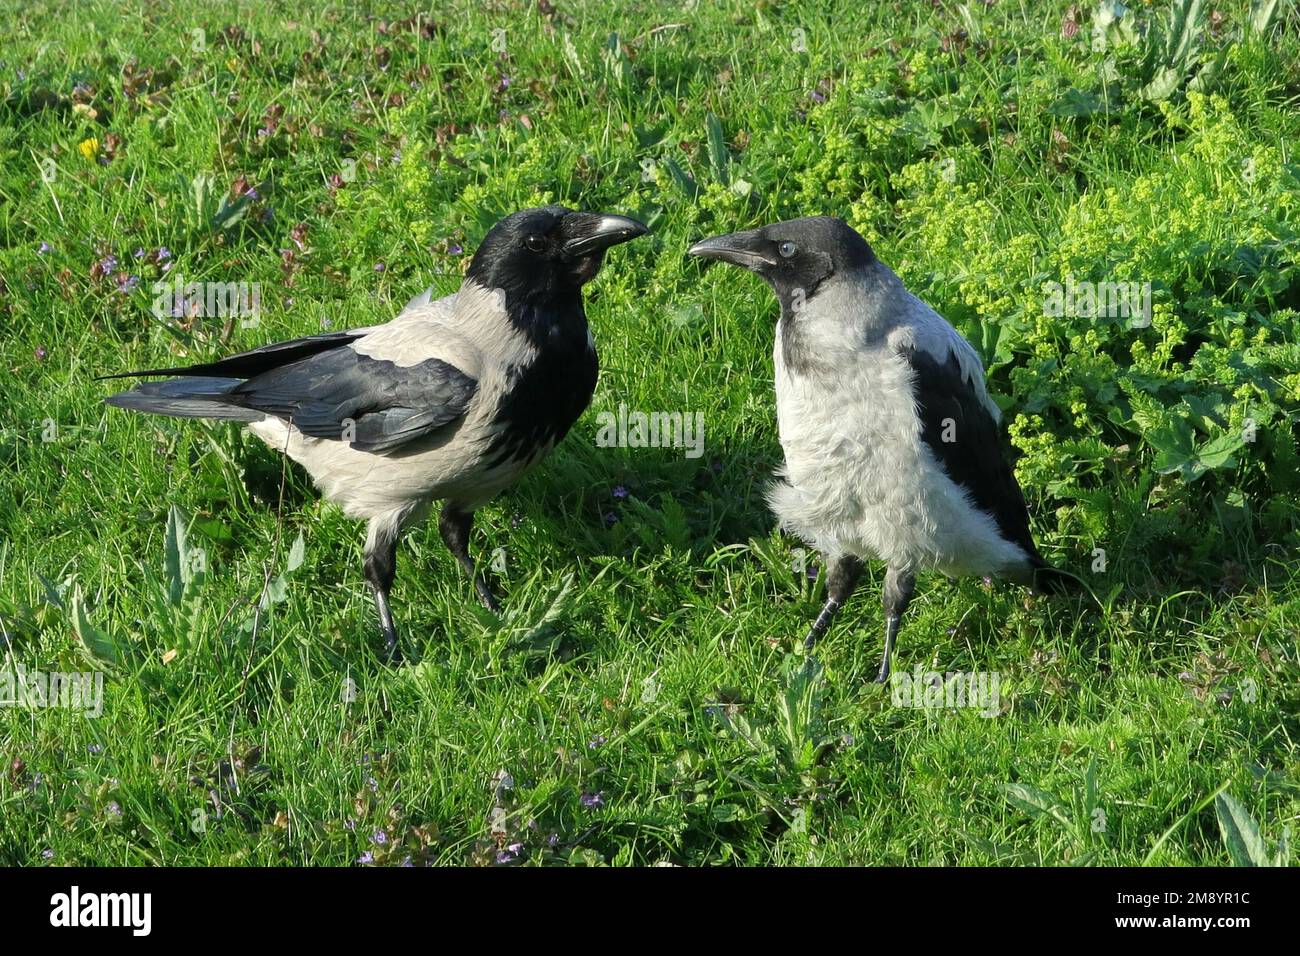 Hooded Crow, Corvus cornix, bird mother in grass prepared to feed a hungry fledgling on a summer morning. Stock Photo